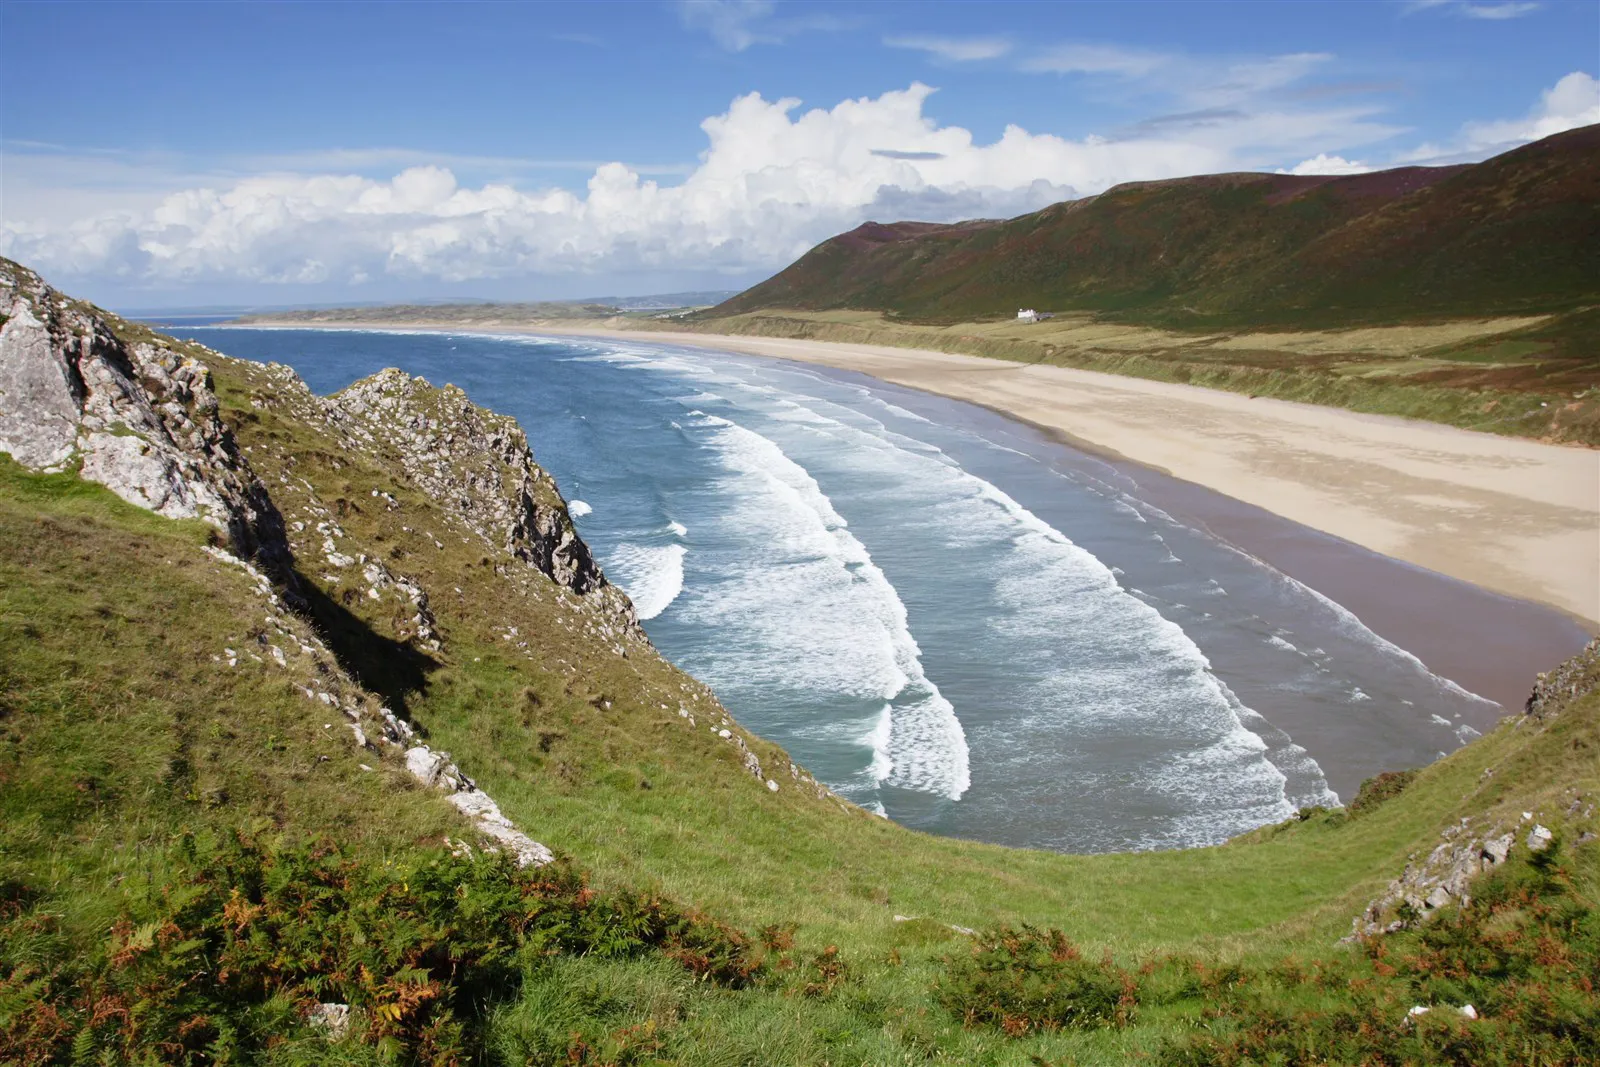 Outstanding Rhossili Beach on the Gower Peninsula of Wales